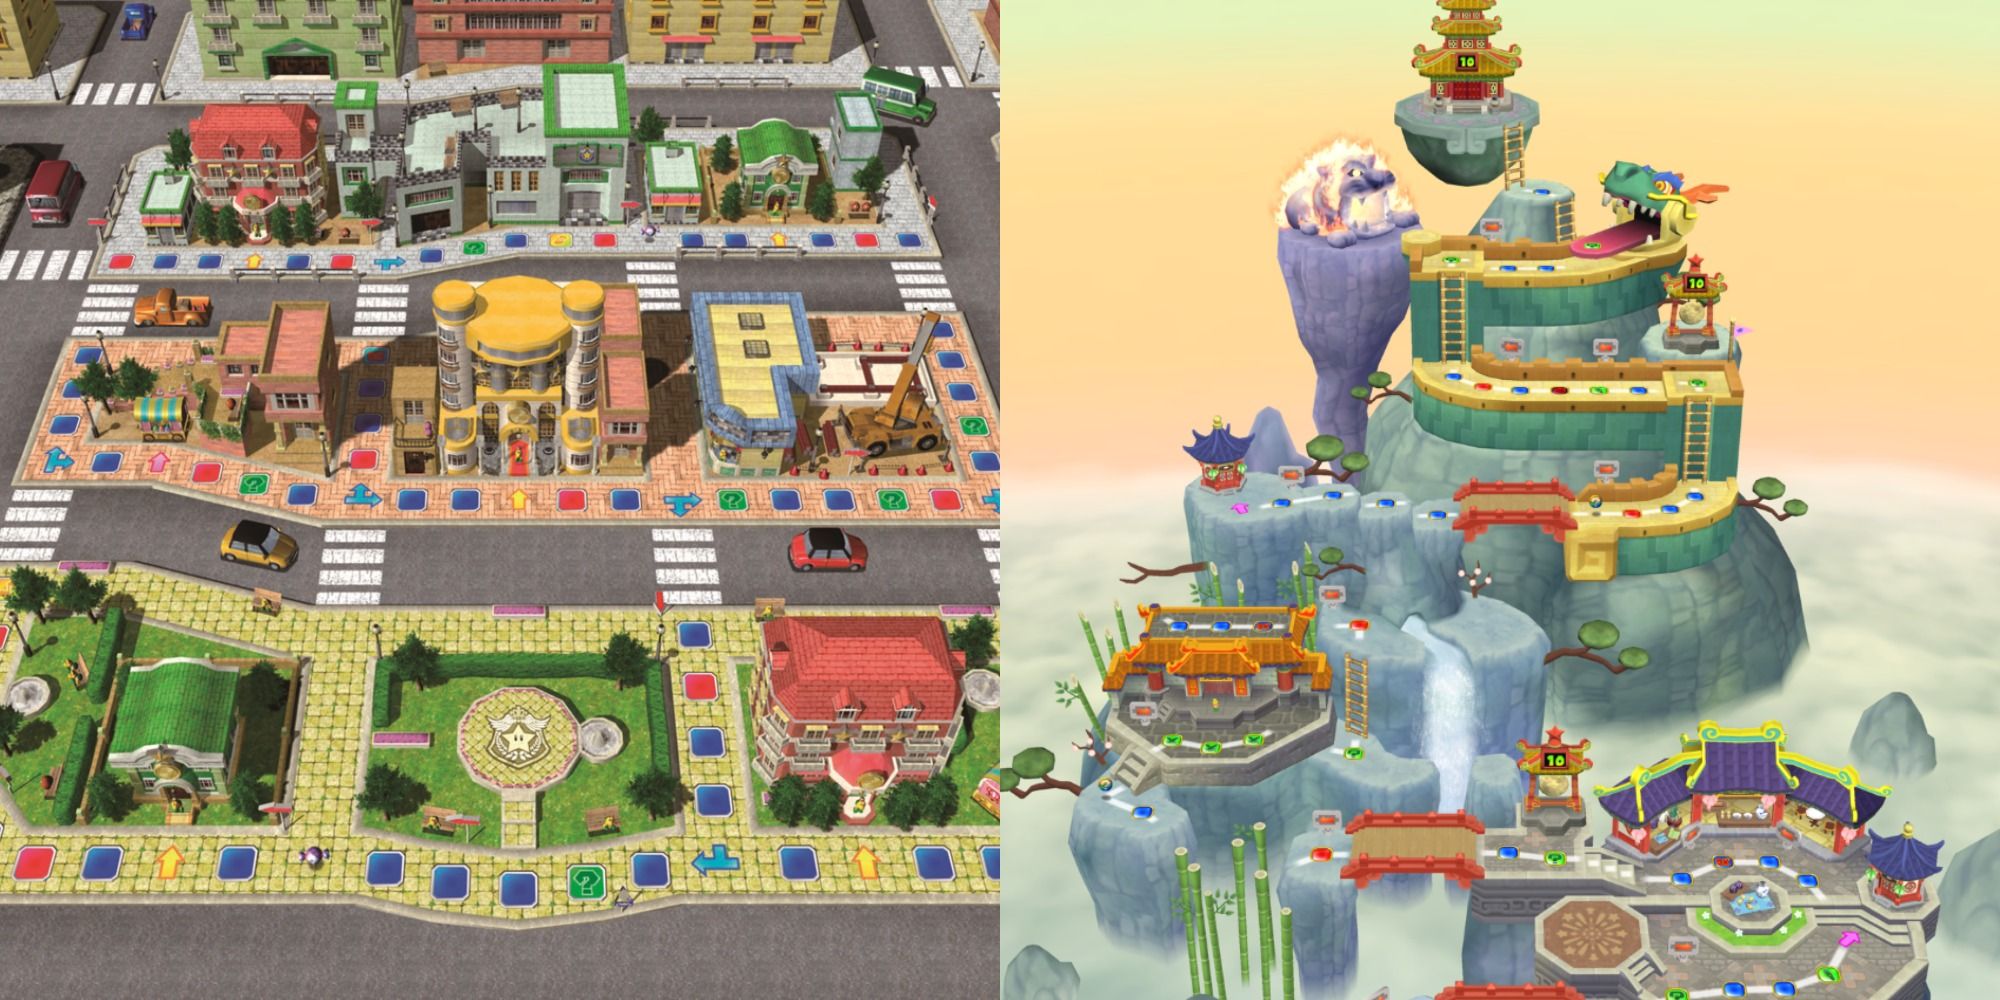 Split image showing the Koopa's Tycoon Town and Pagoda Peak boards in Mario Paerty games.